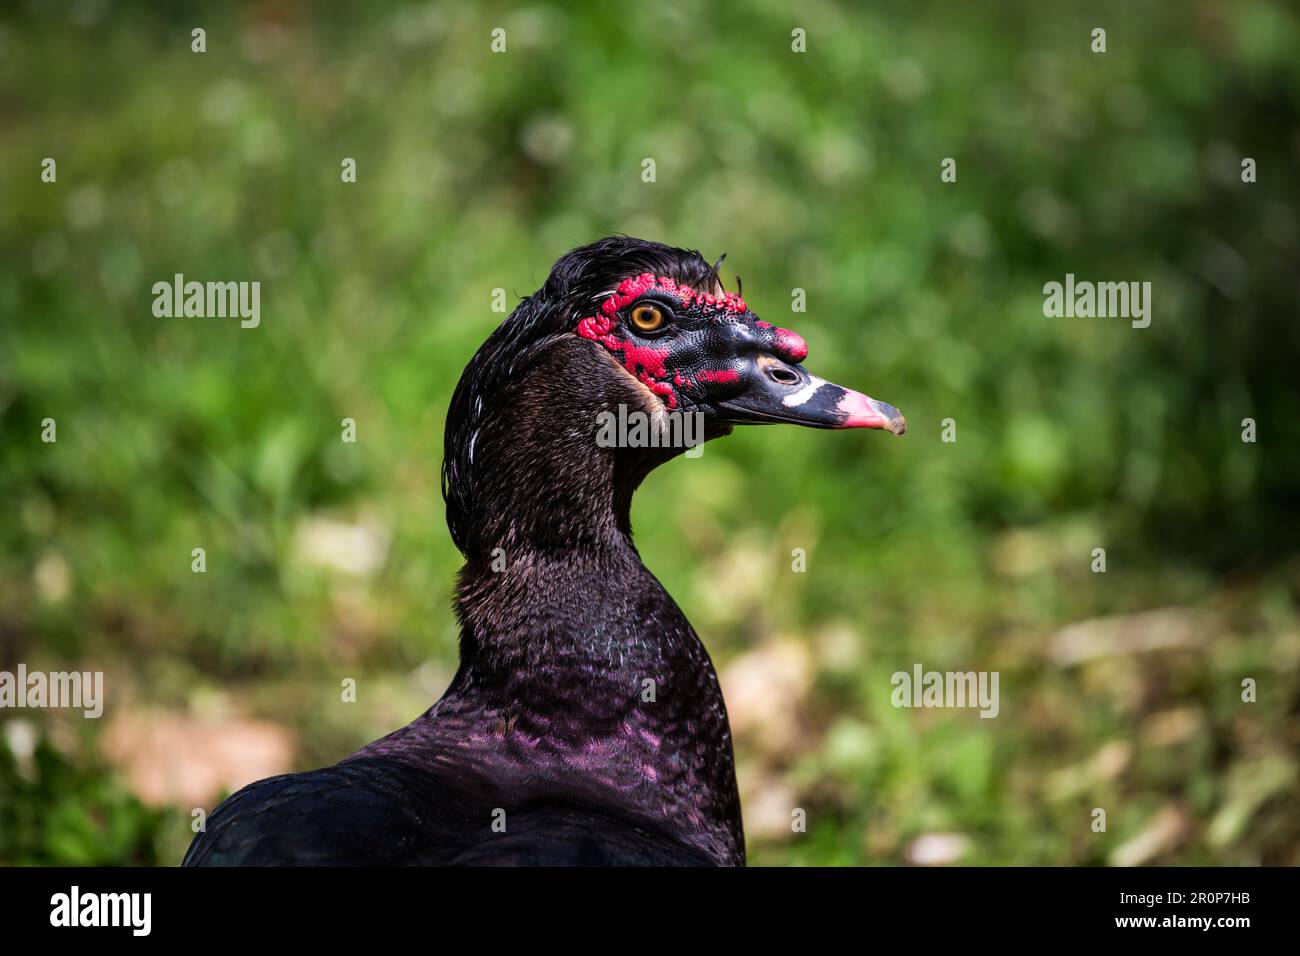 Black male muscovy duck (Cairina moschata) Stock Photo